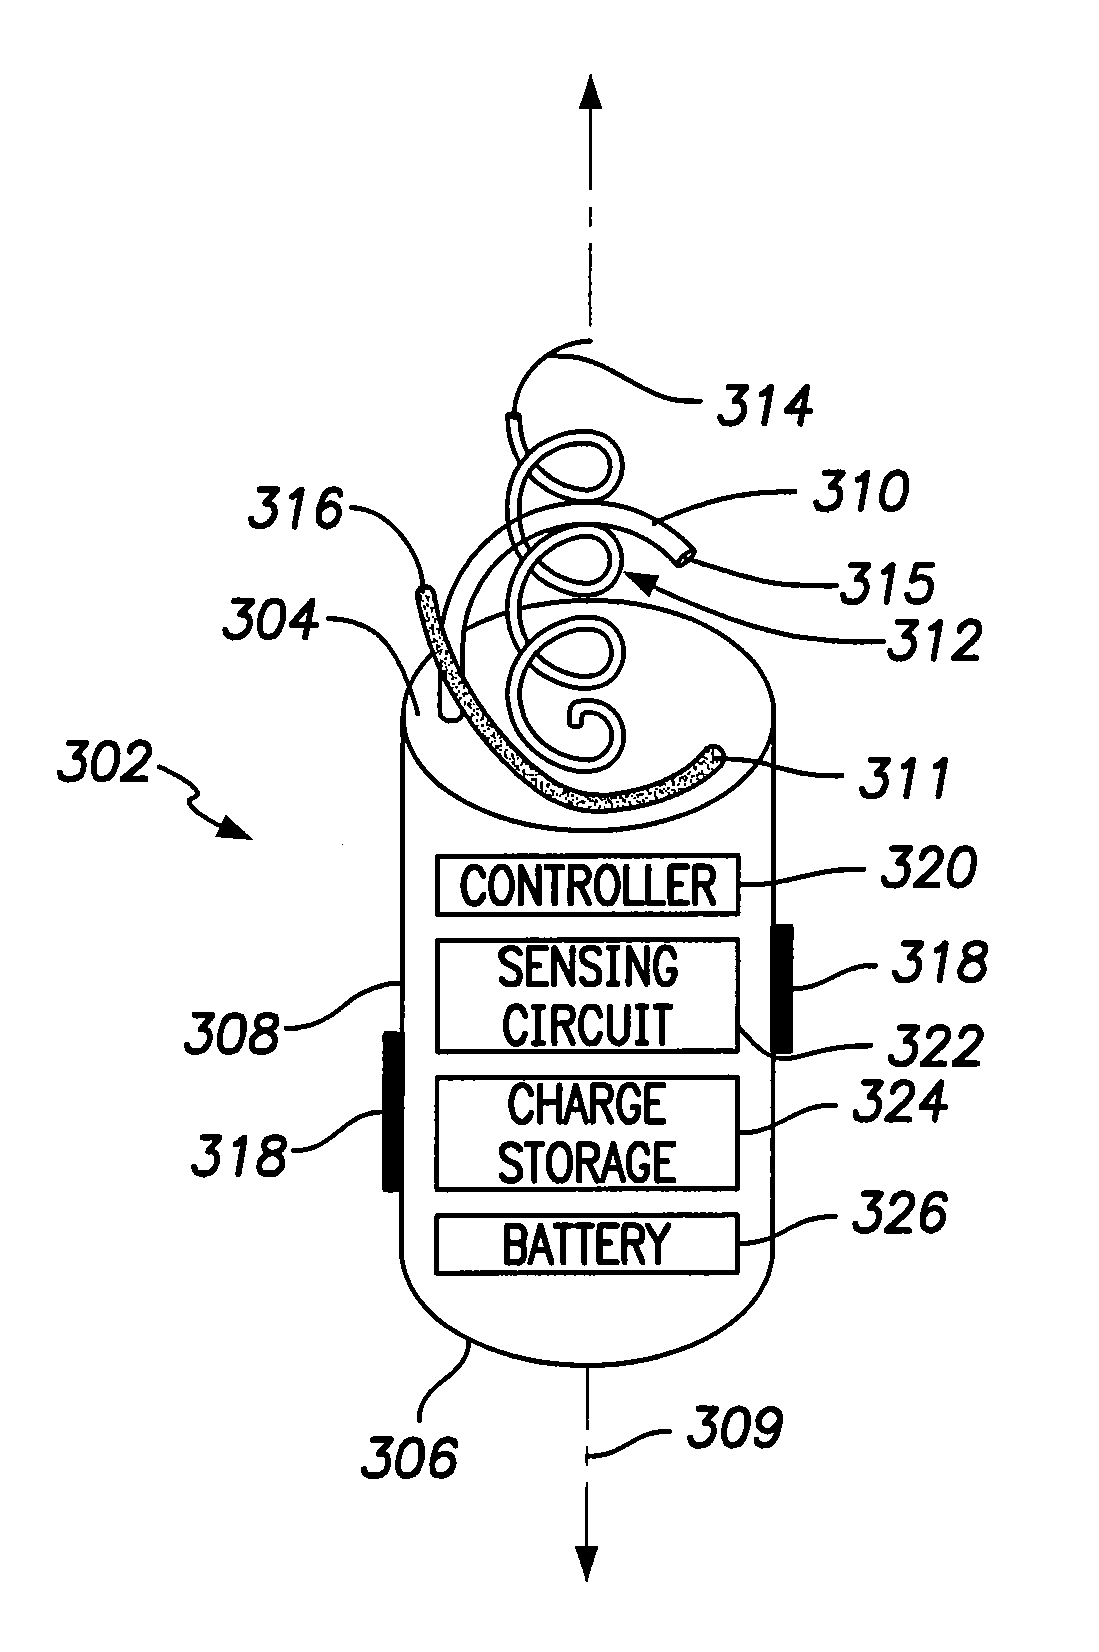 Single chamber leadless intra-cardiac medical device with dual-chamber functionality